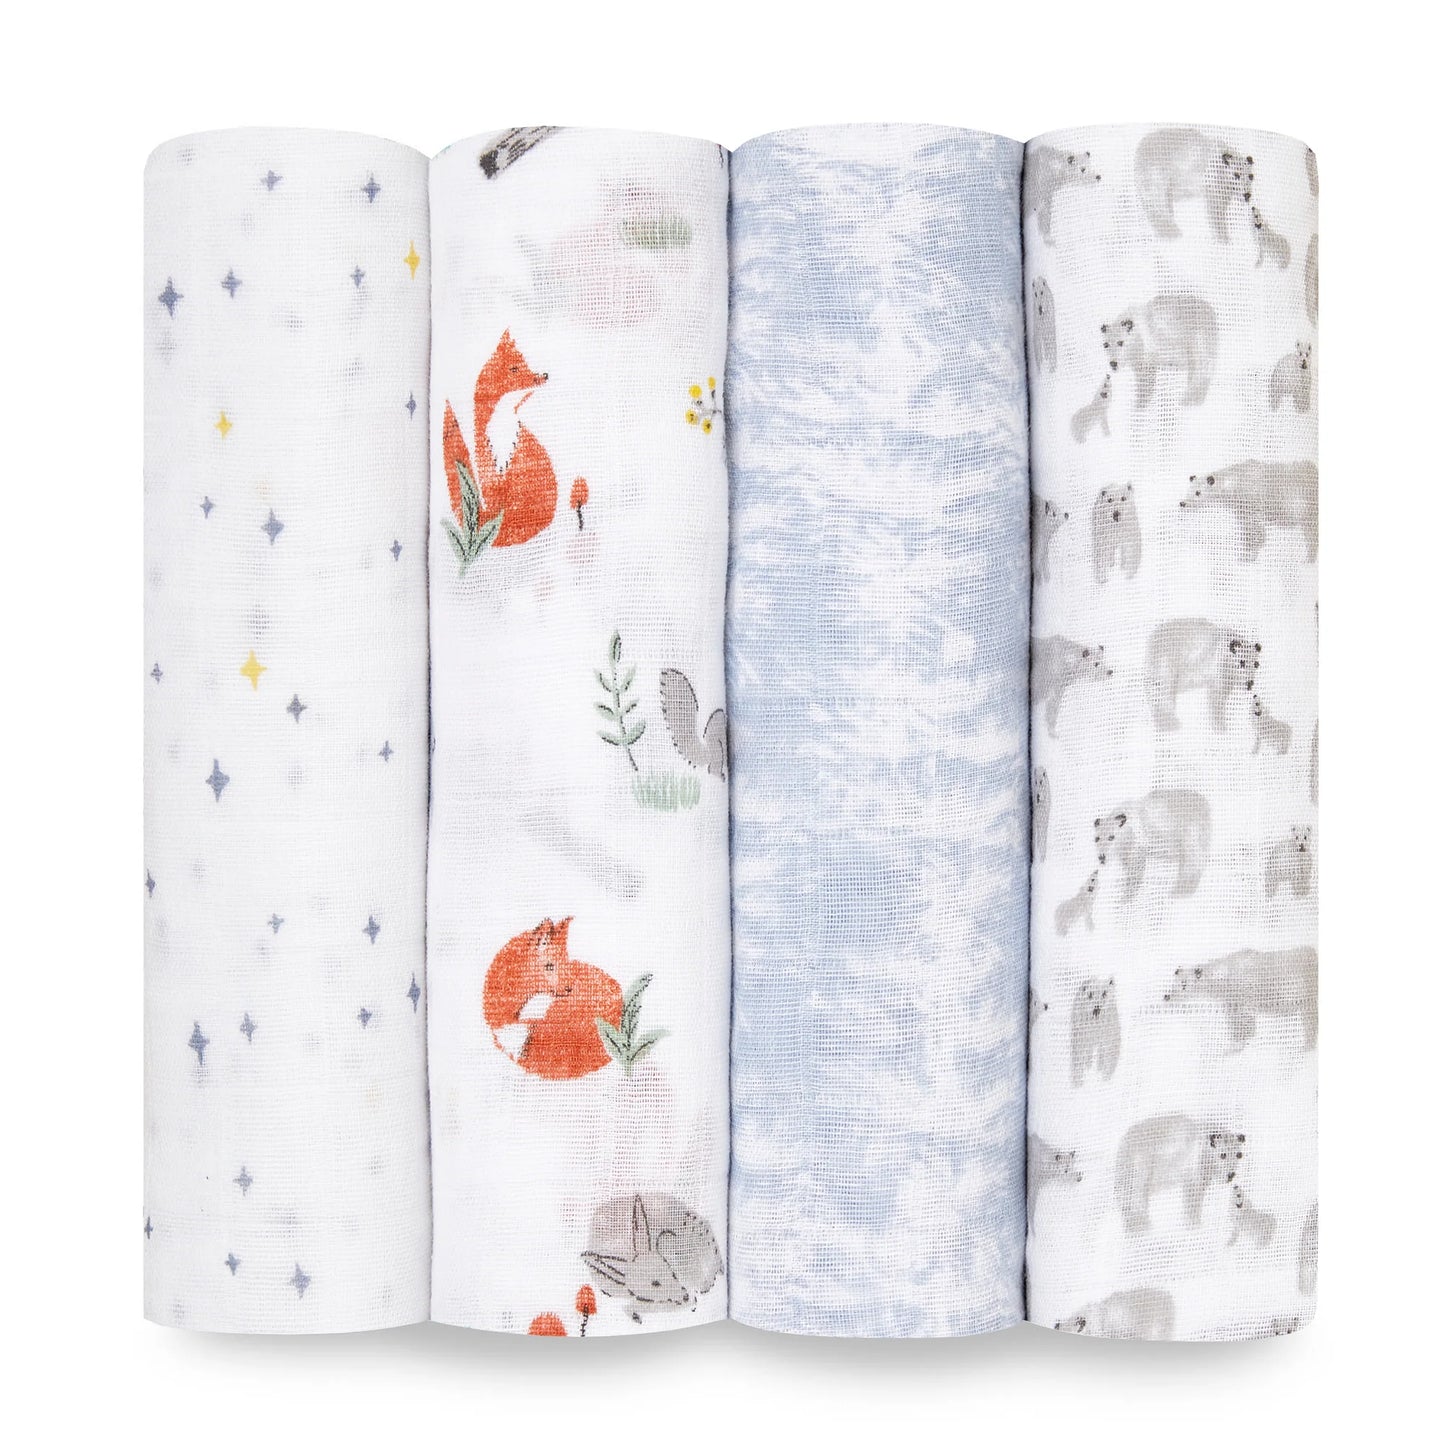 Aden+Anais Classic Swaddles 4 Pack - Naturally